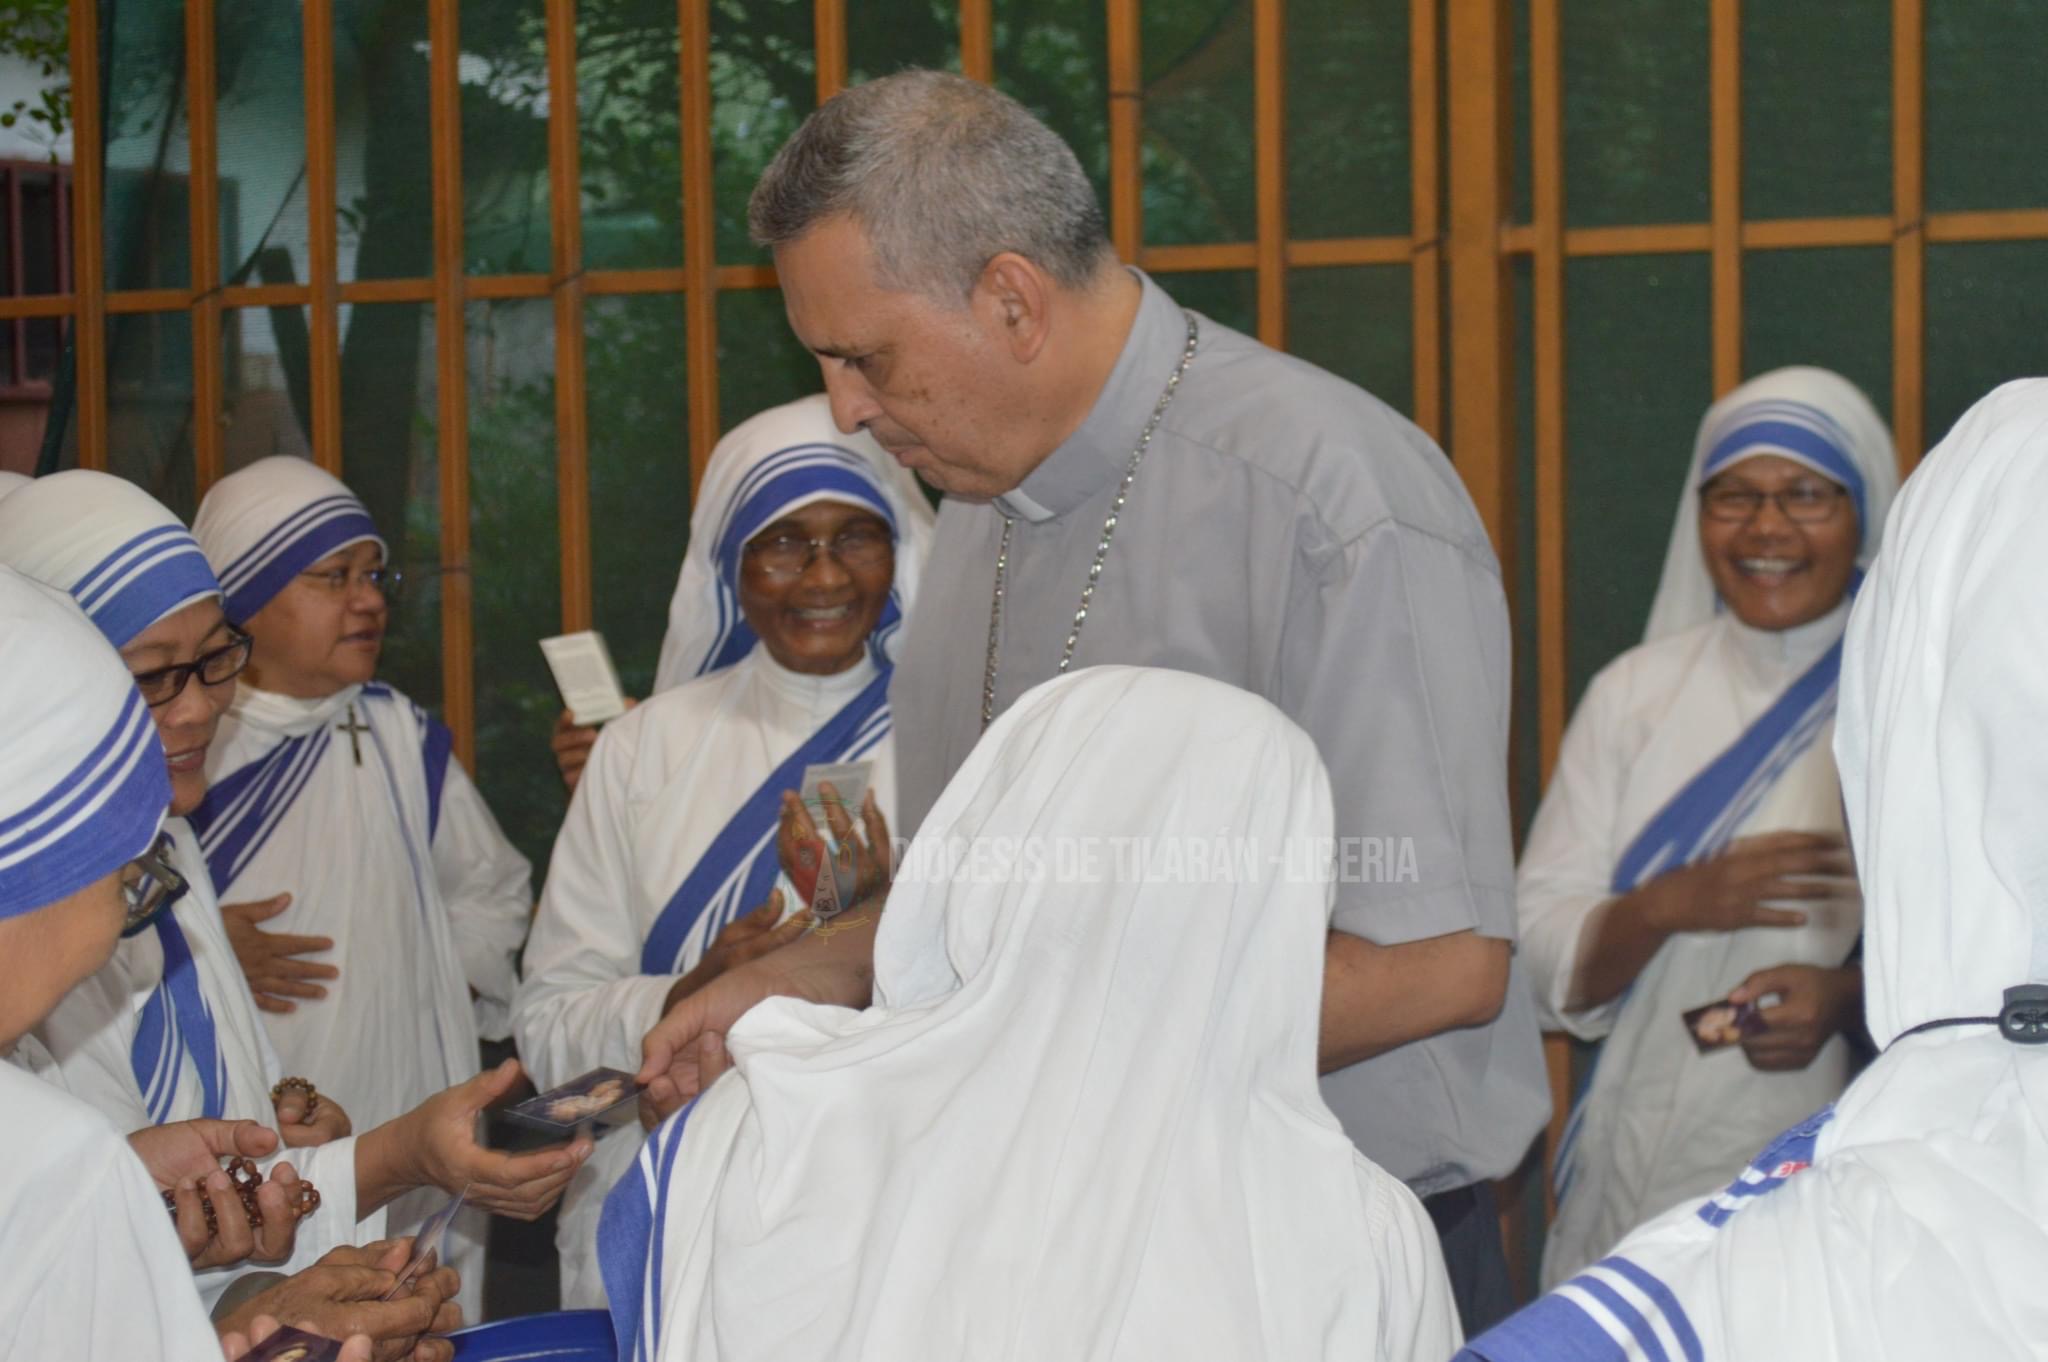 Ortega deported Missionaries of Charity without establishing a legal process